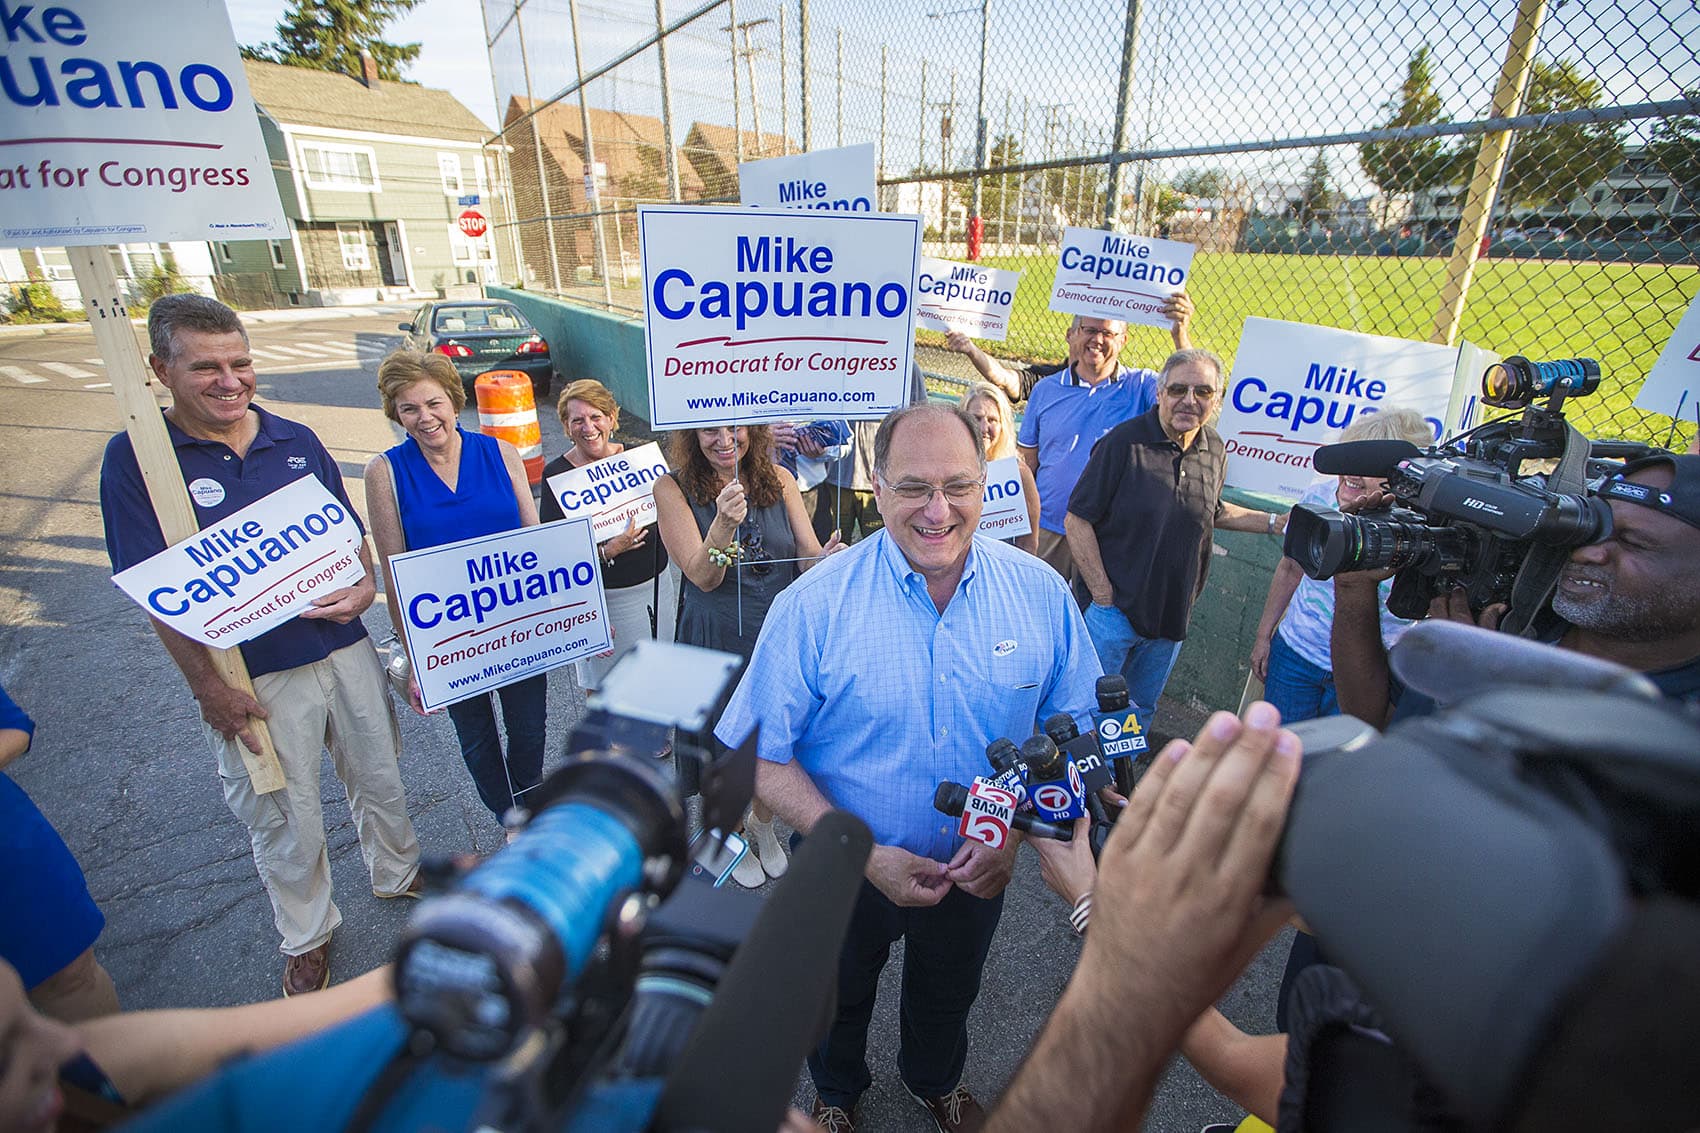 With supporters behind him, U.S. Rep. Michael Capuano speaks with the media outside of Trum Field in Somerville in the early morning of primary voting day. (Jesse Costa/WBUR)